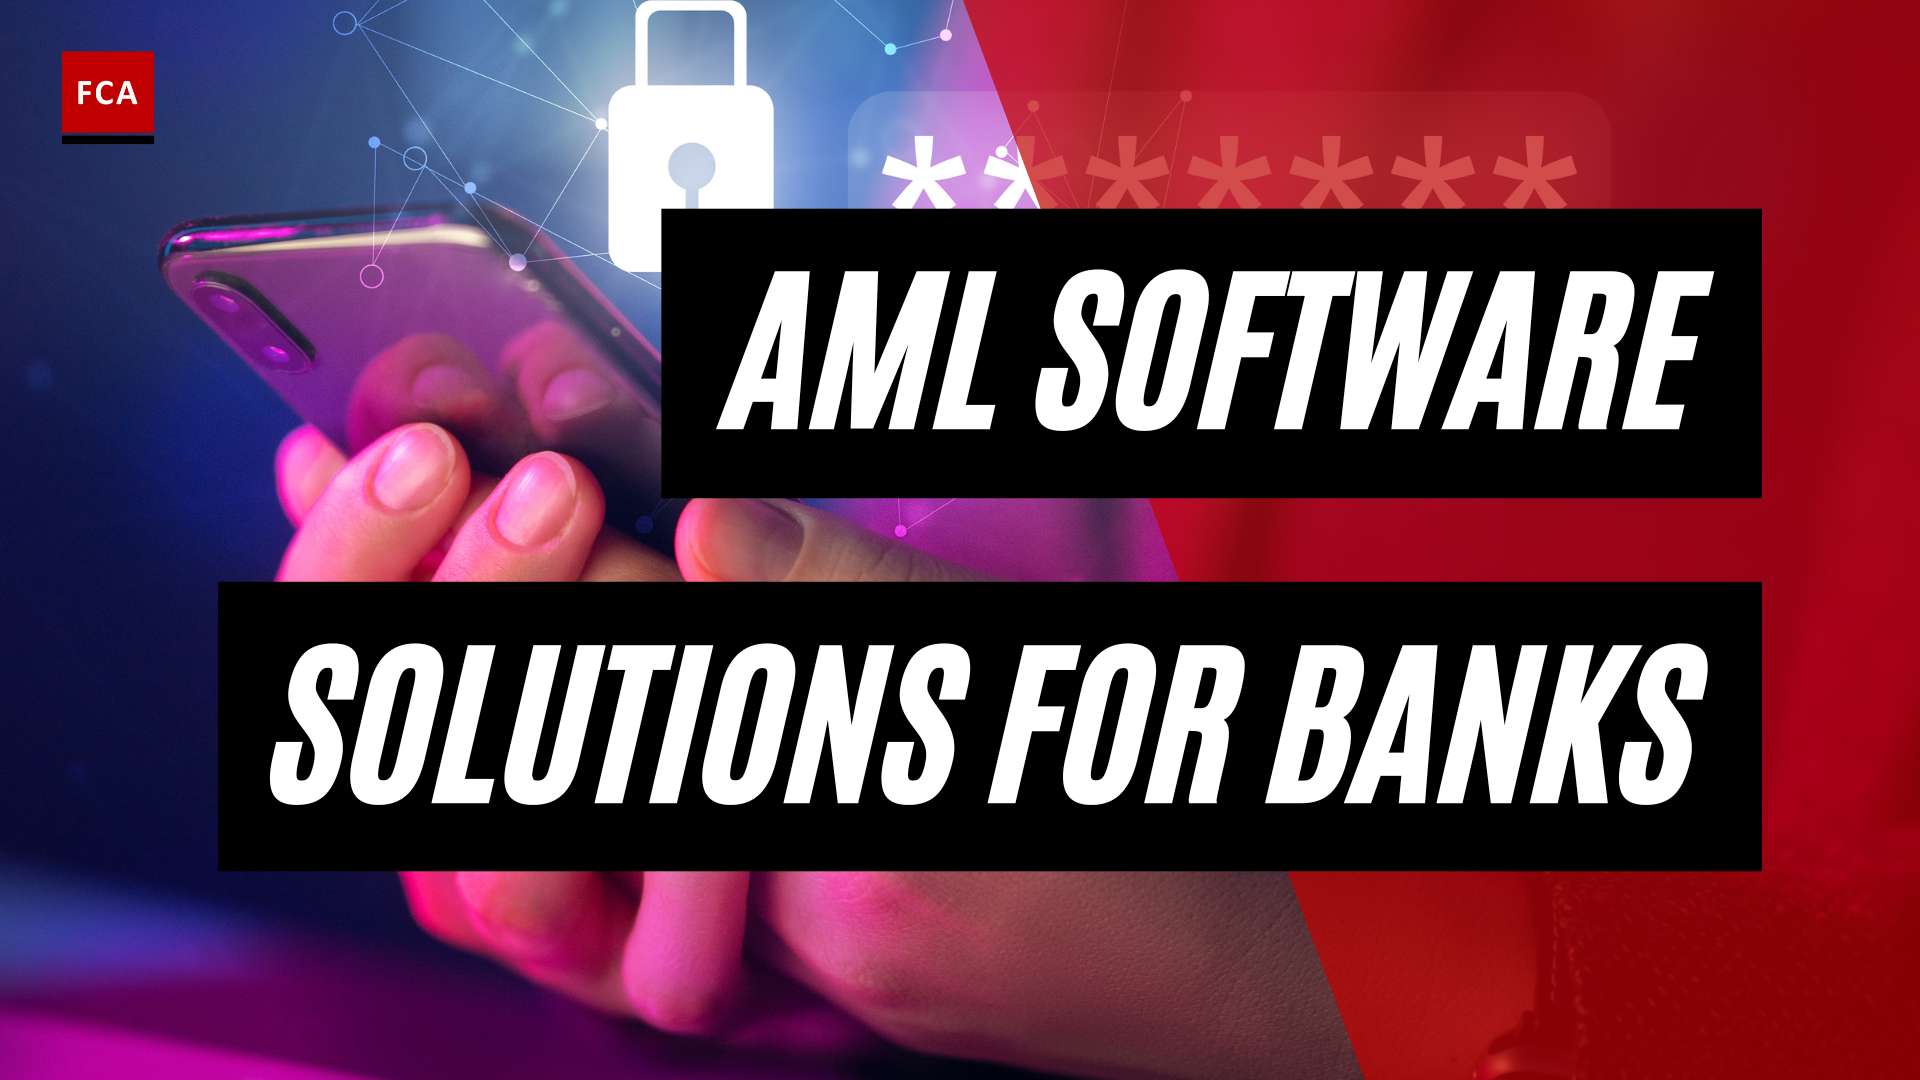 Stay Ahead Of Financial Crimes: Cutting-Edge Aml Software Solutions For Banks